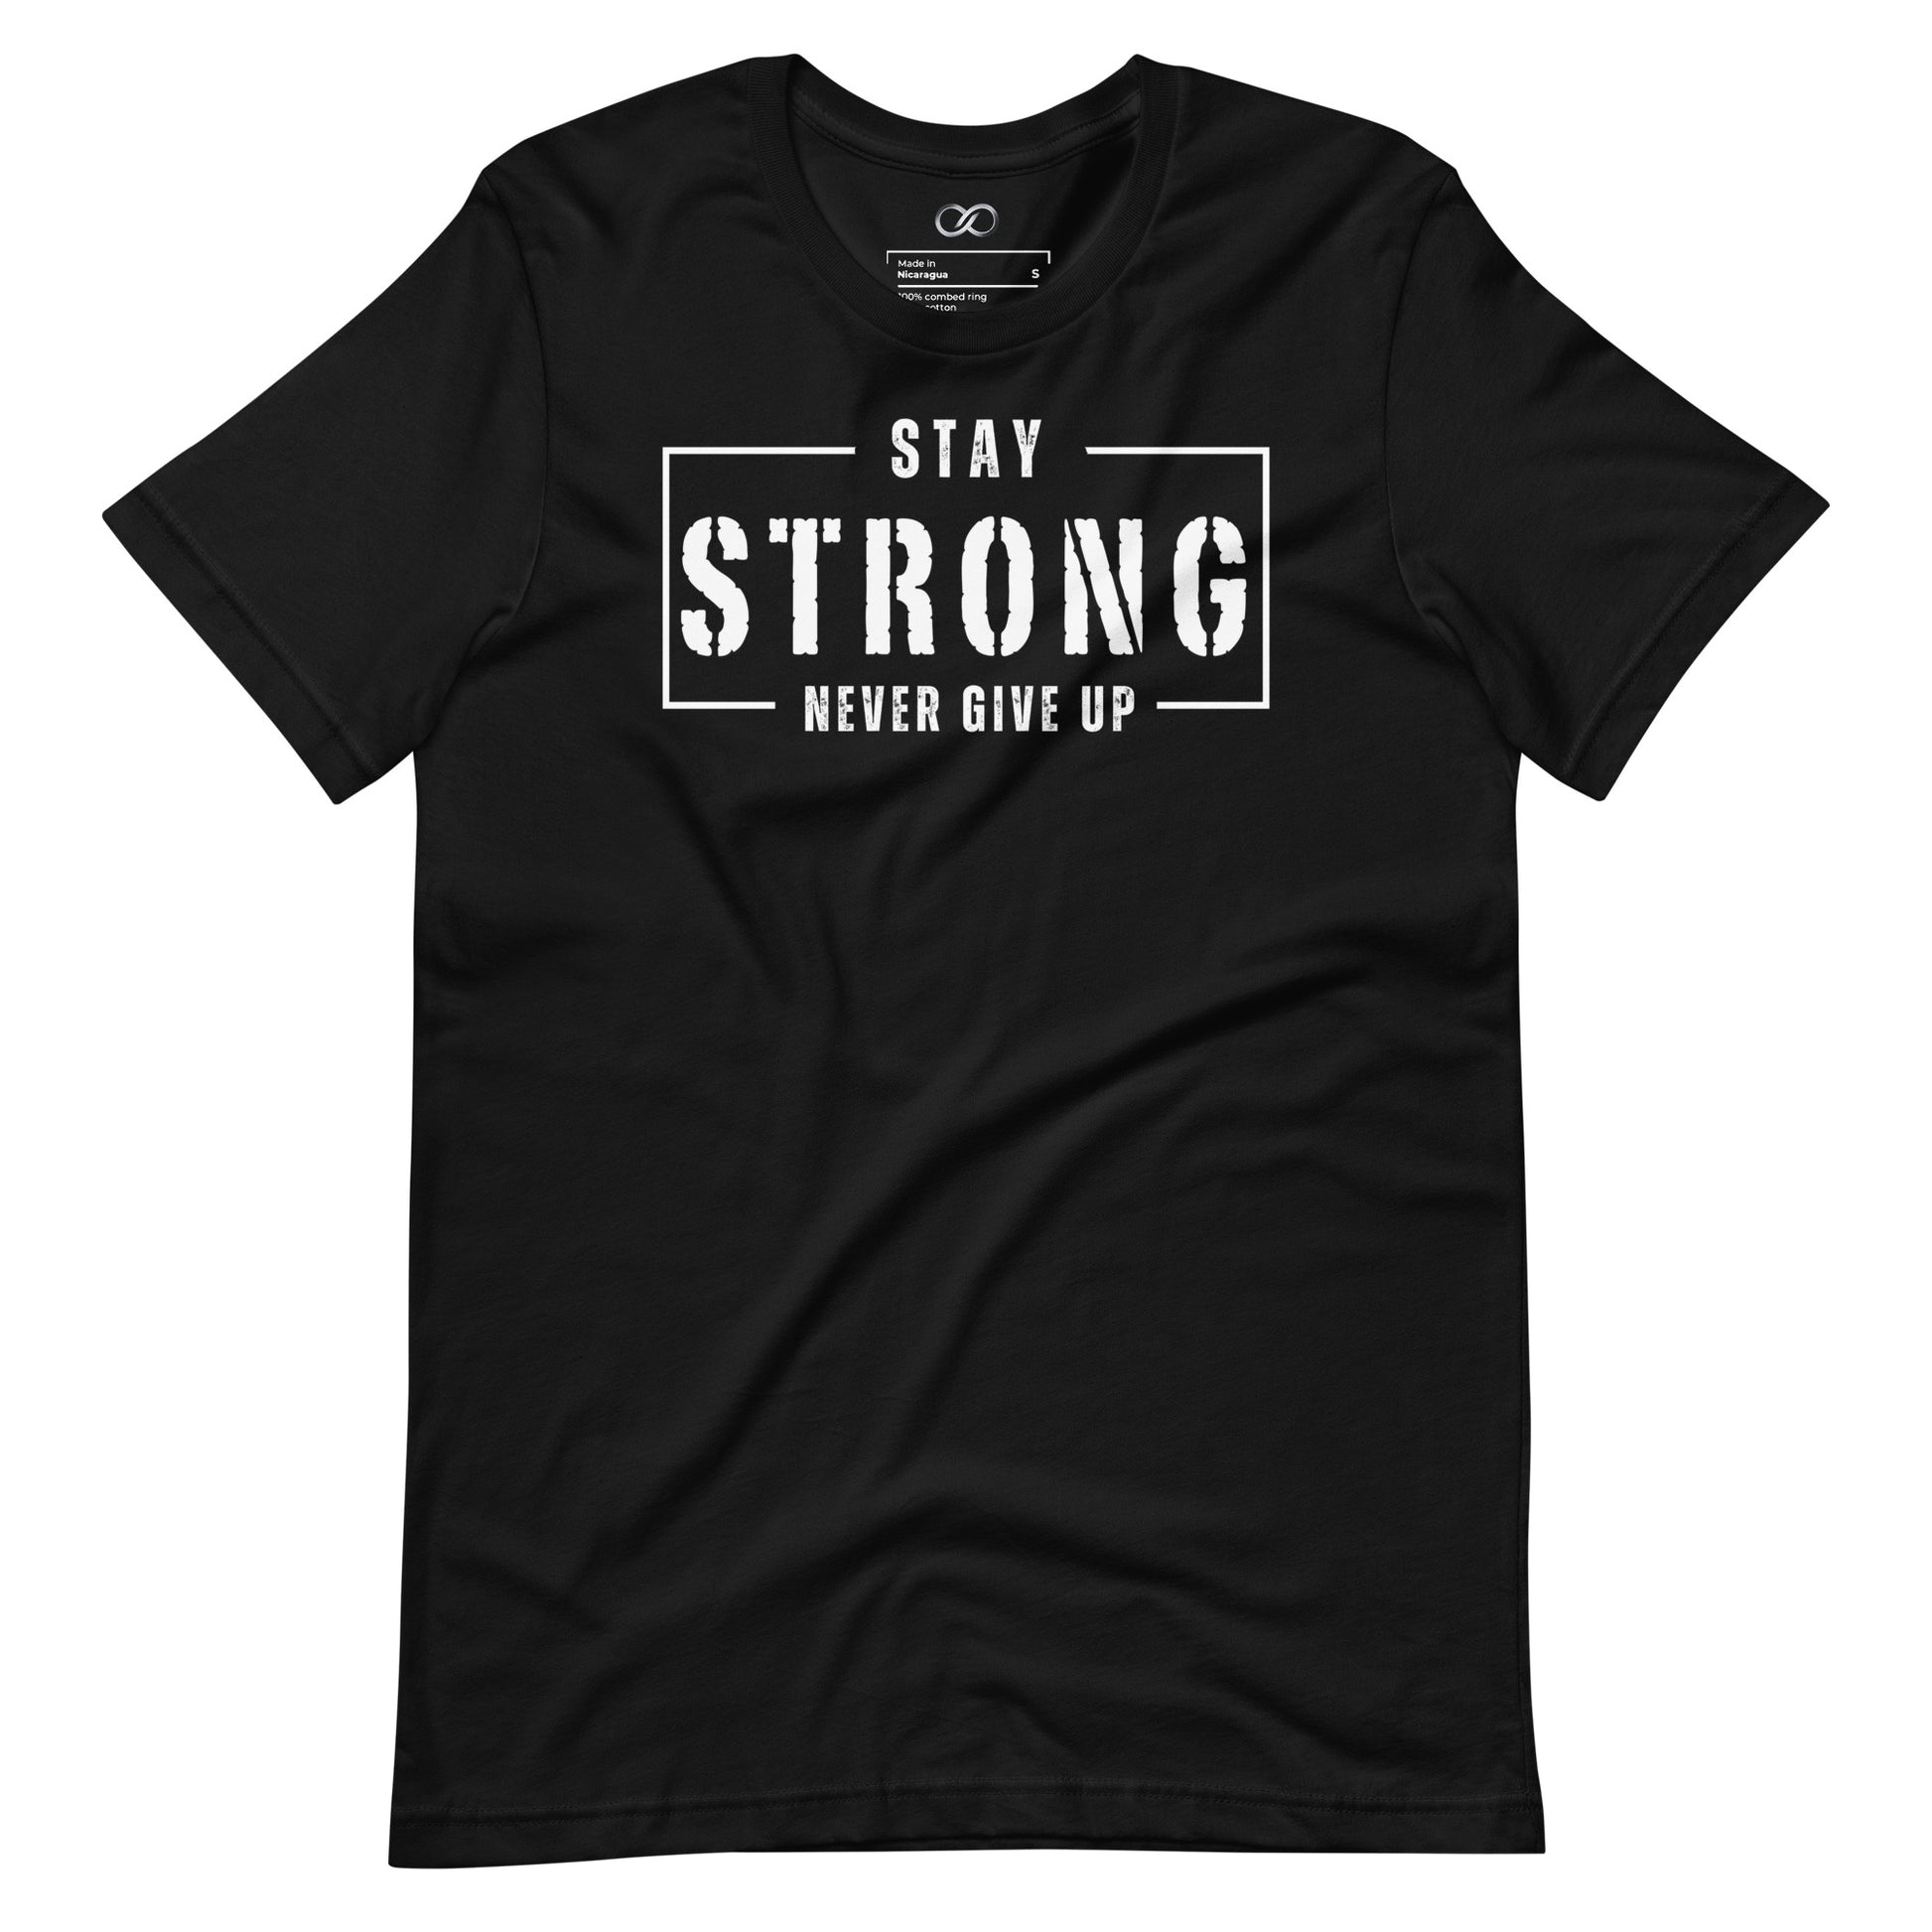 Black crew neck t-shirt featuring the motivational phrase 'Stay Strong Never Give Up' in bold white lettering, symbolizing determination and courage.